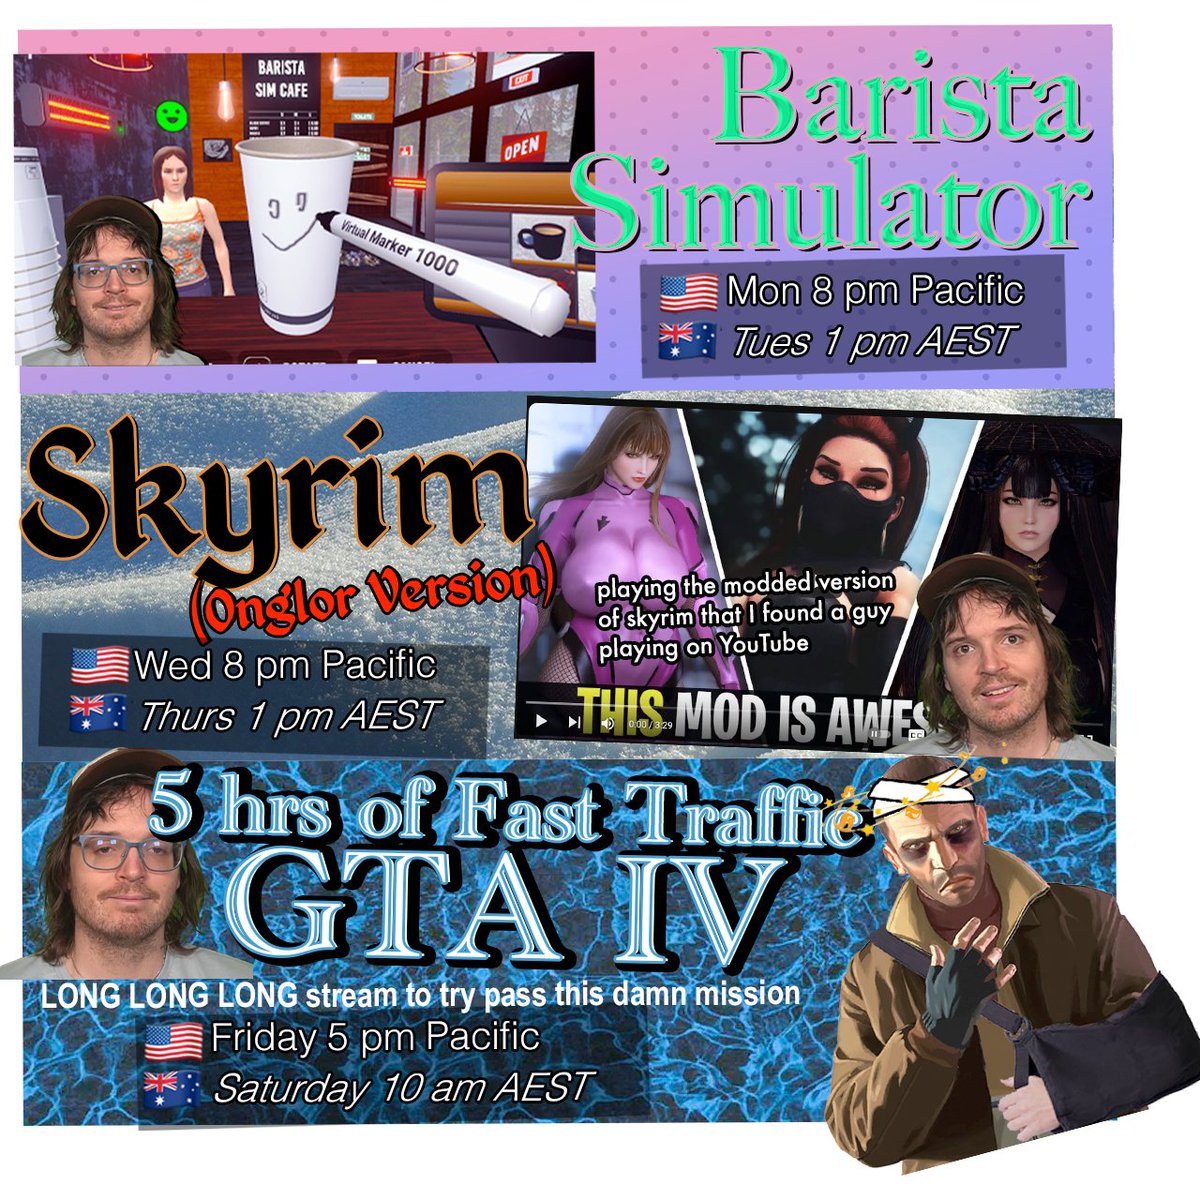 stream schedule! making coffee, playing the horny modded version of Skyrim that I have PAINSTAKINGLY removed nudity from and then an extra long 5 hour stream seeing if I can pass the new roadblock mission in Fast Traffic GTA IV